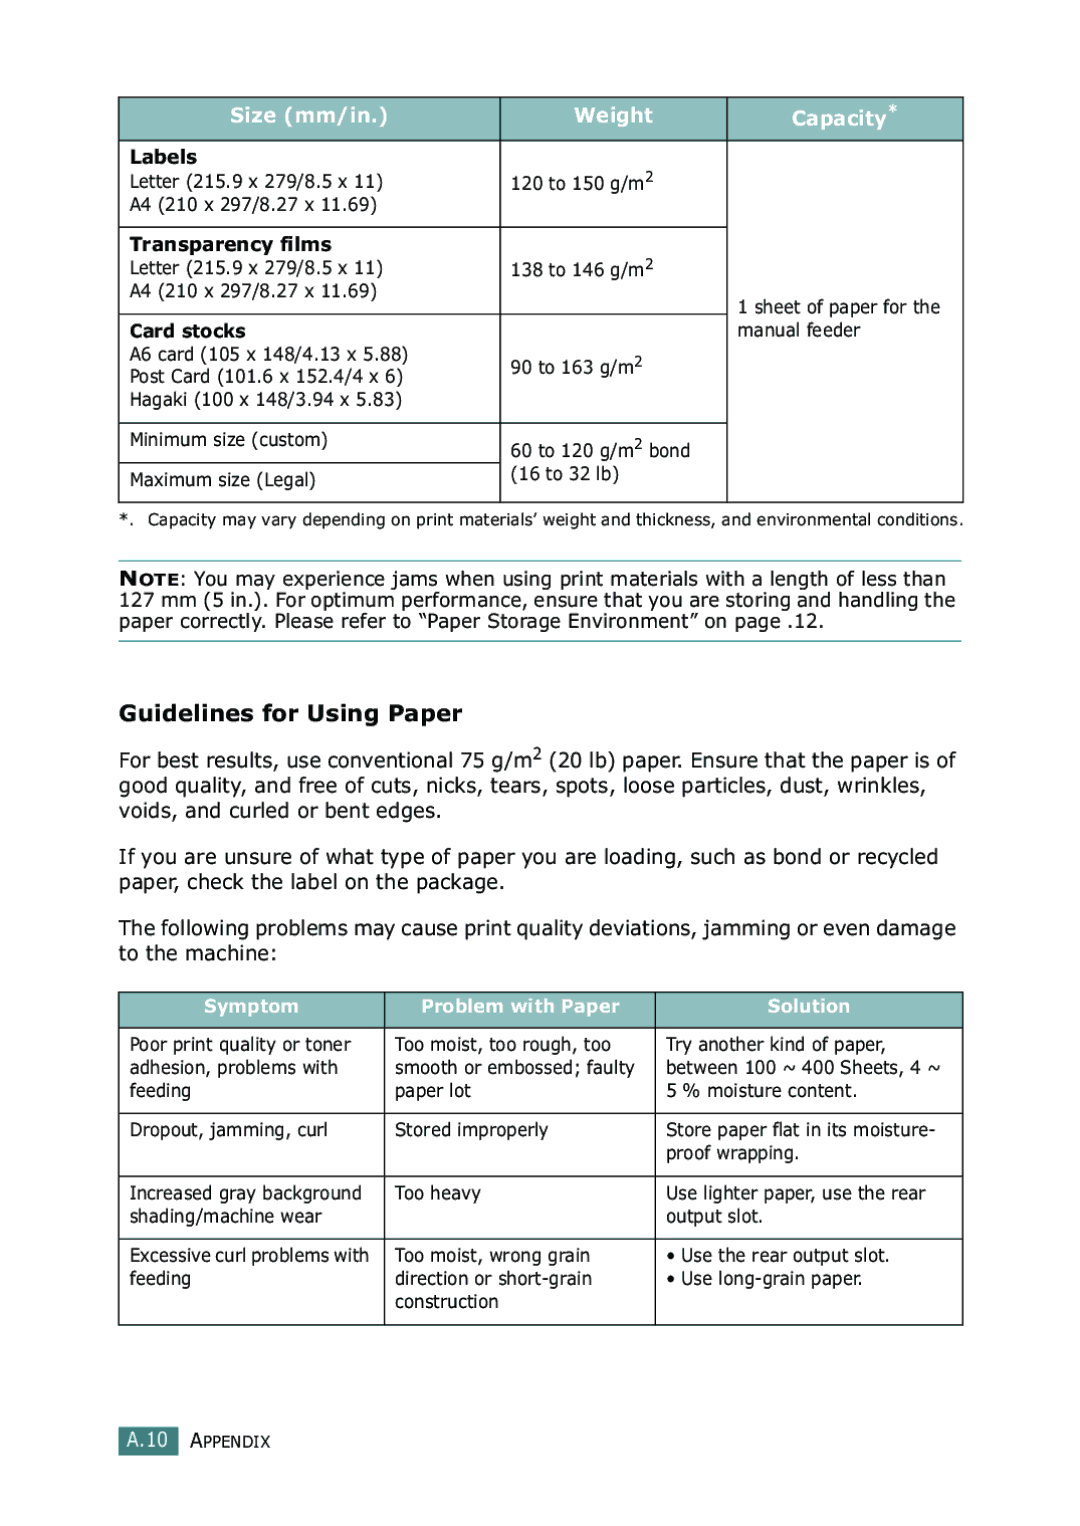 Samsung SF-755P manual Guidelines for Using Paper, Transparency films 